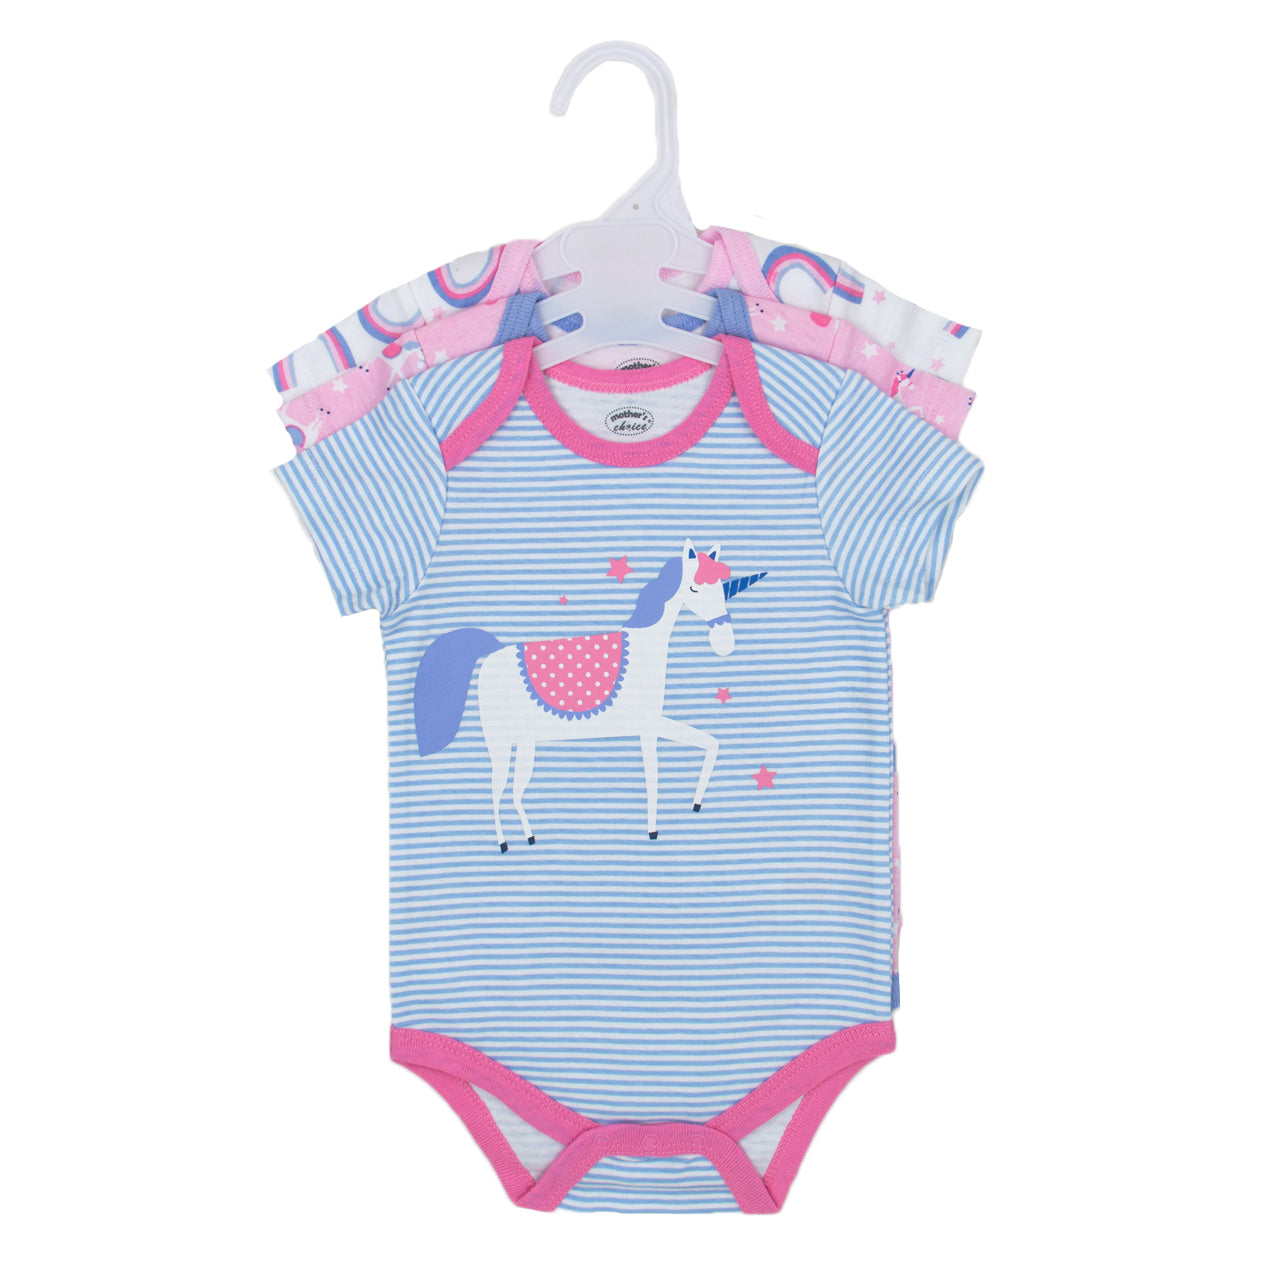 Mother's Choice 3 Pack Short Sleeves Onesie (Unicorn/IT2351)